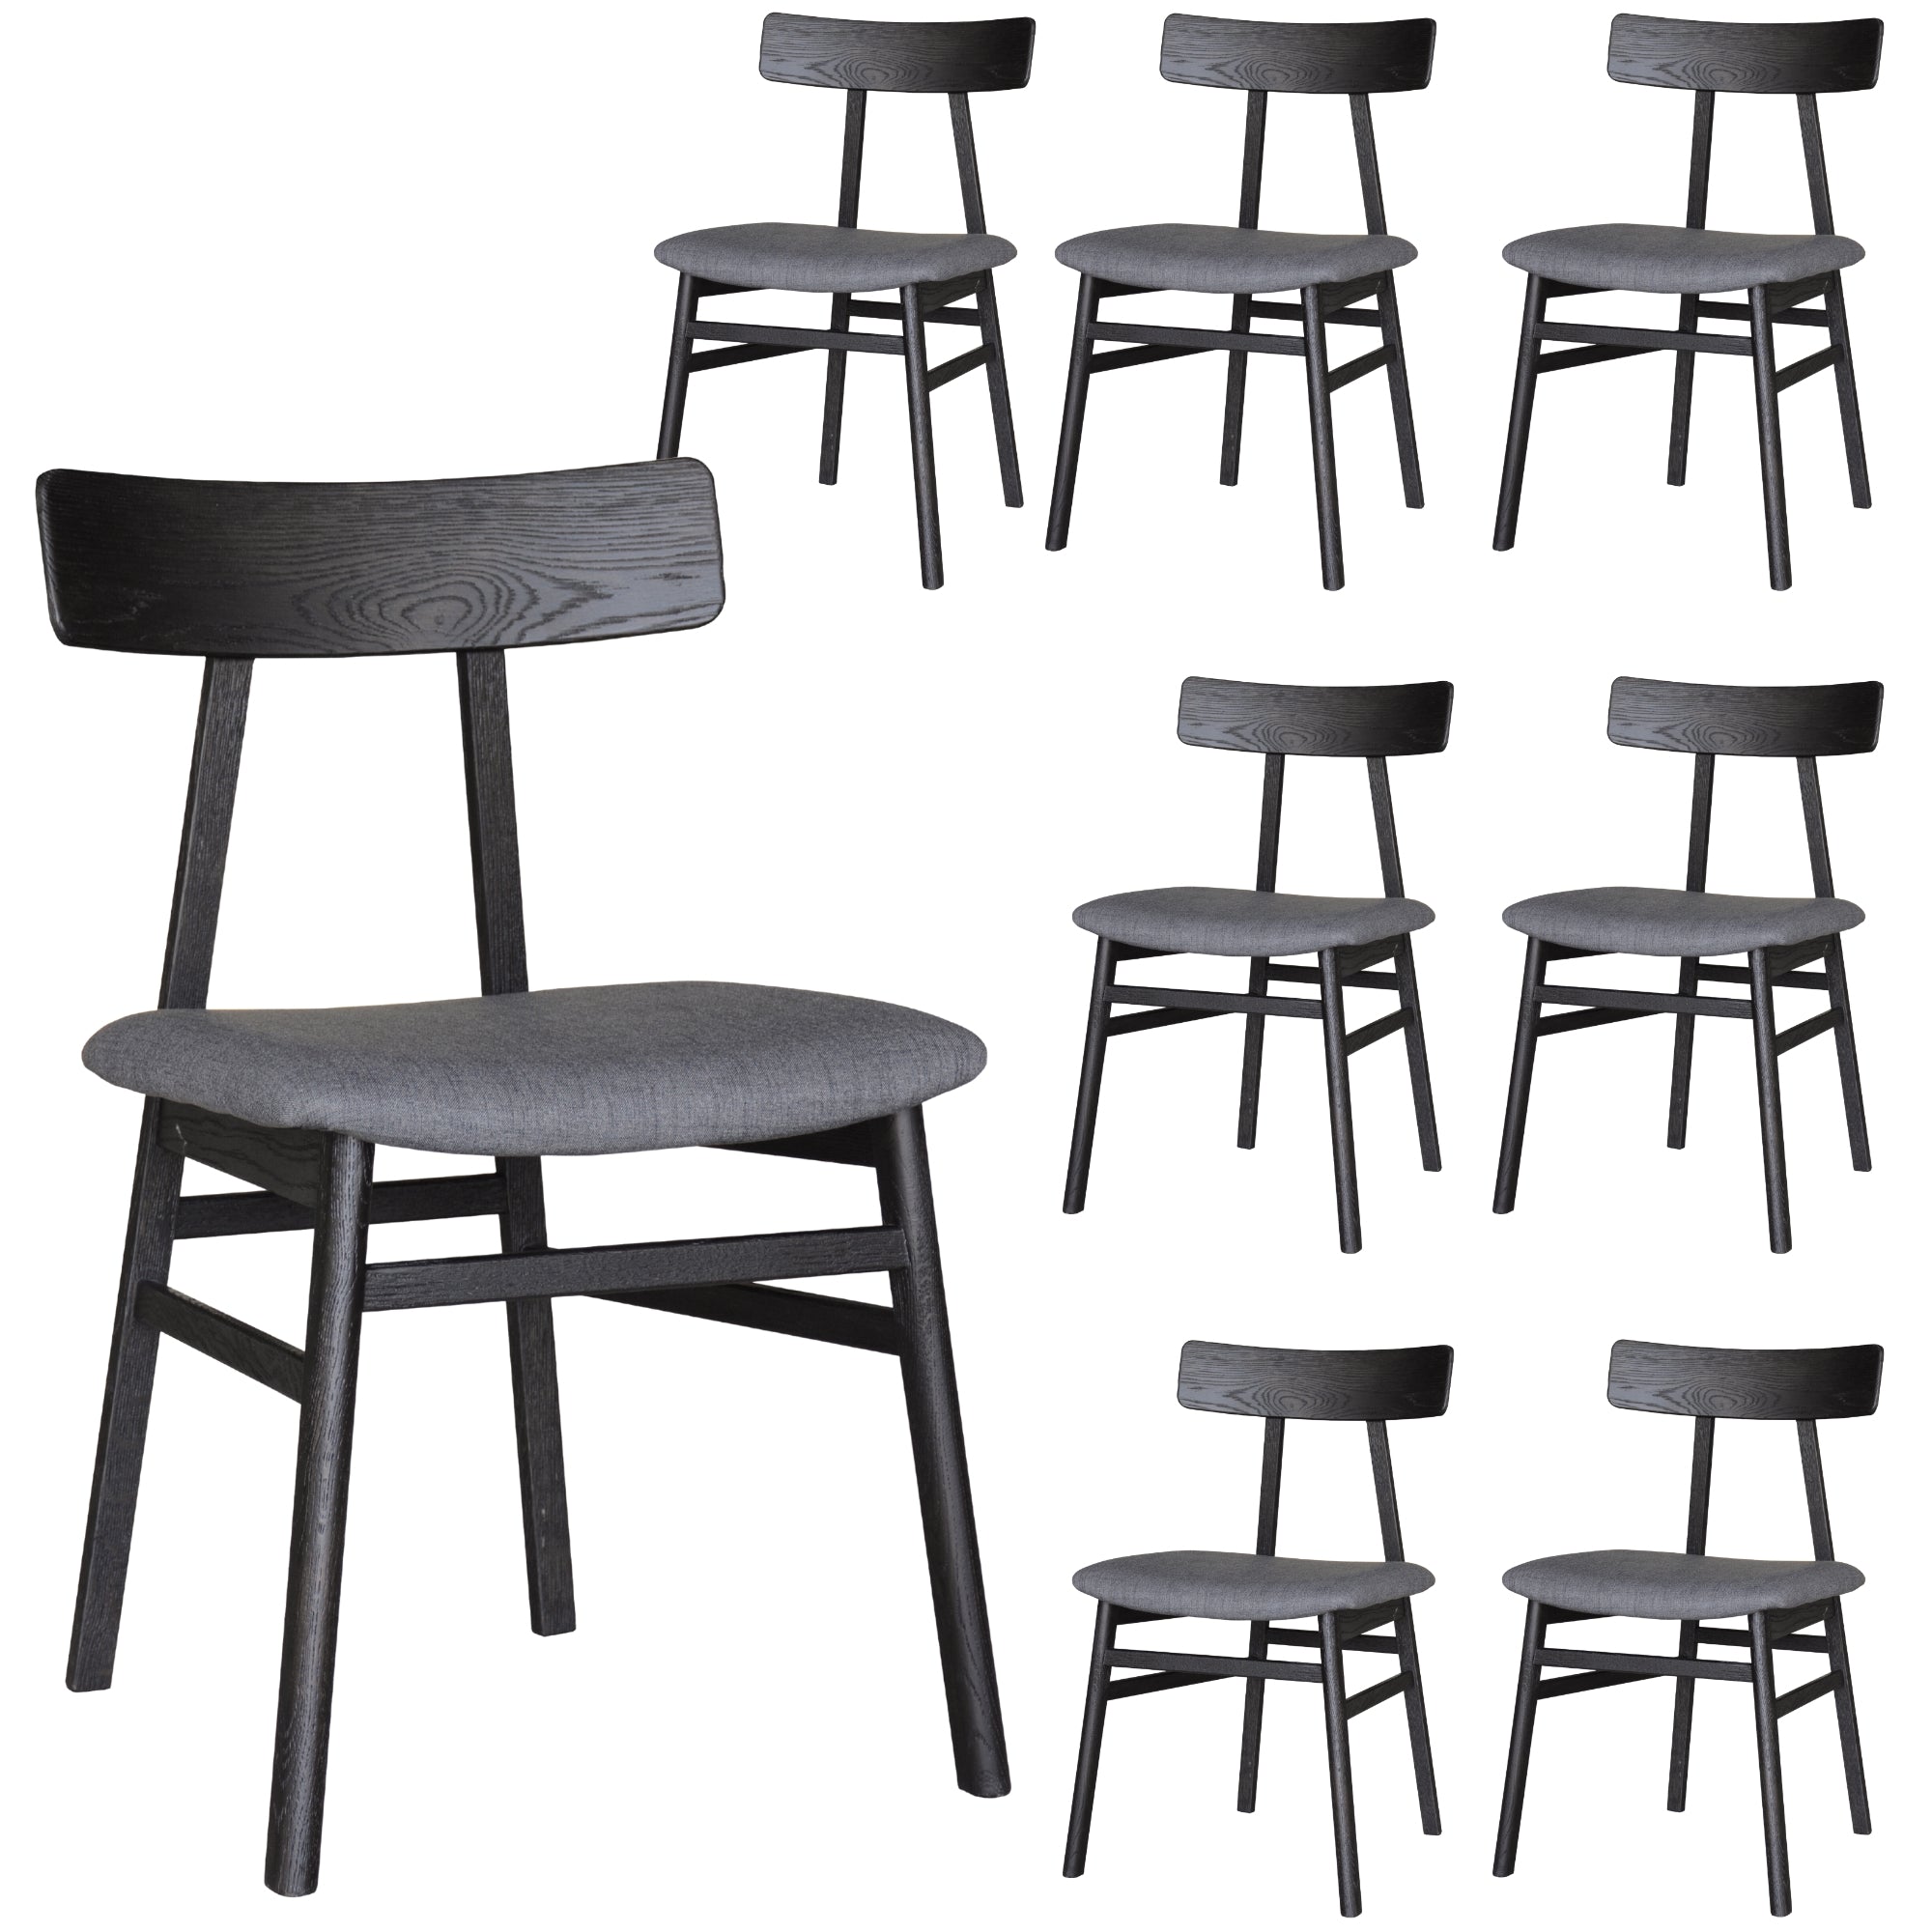 8pc Black Industrial Solid Oak Dining Chair Set, Fabric Seat